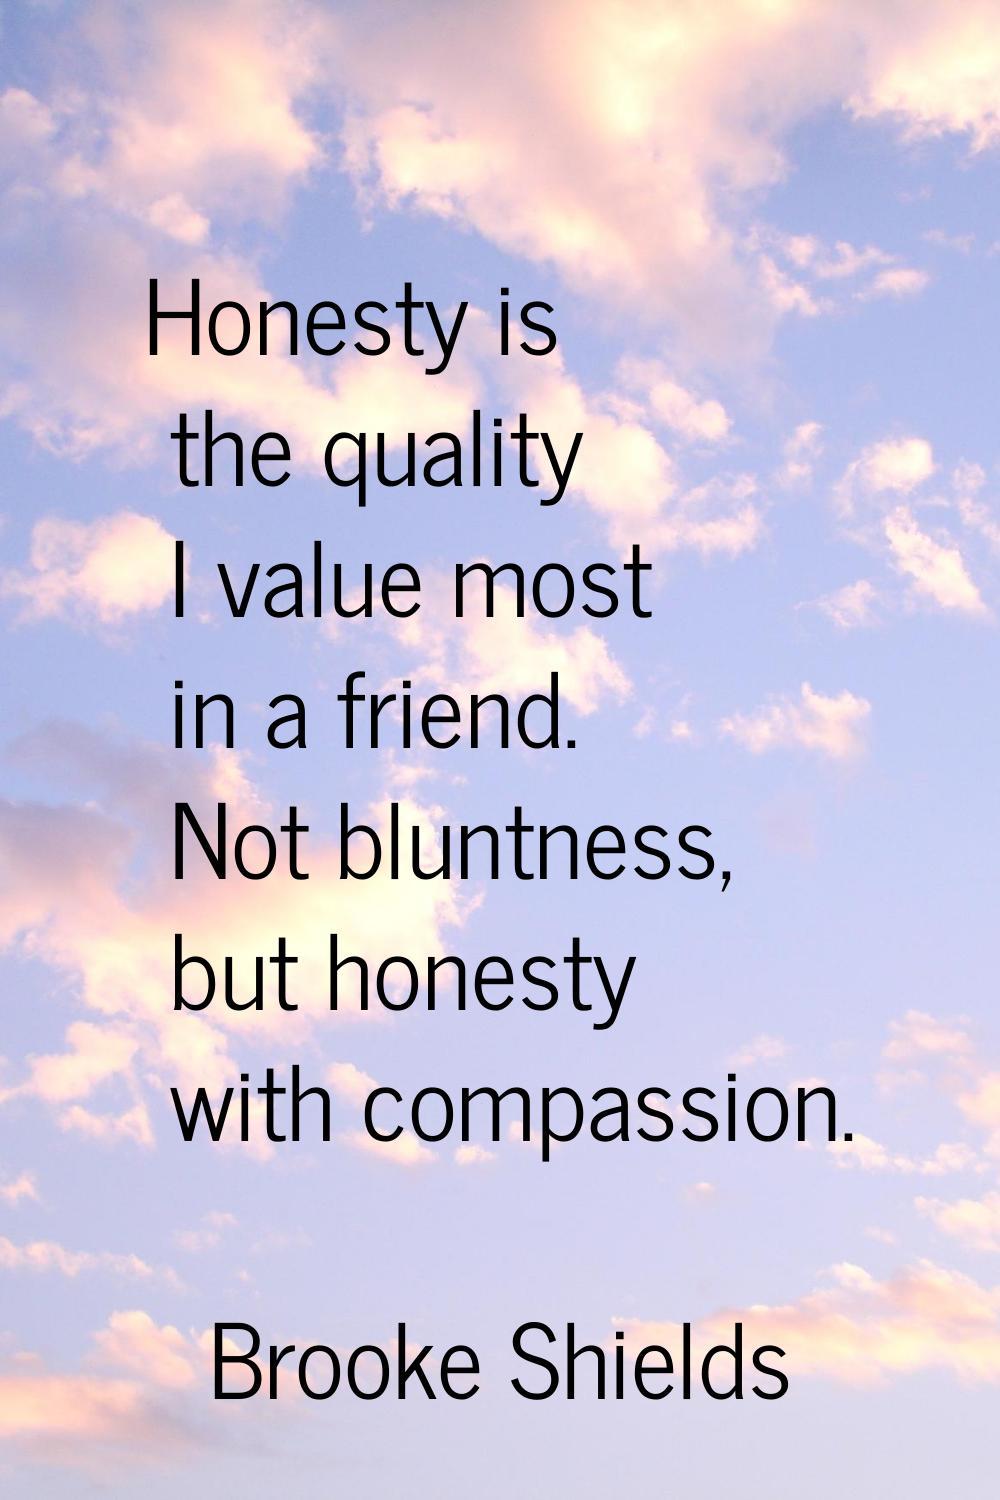 Honesty is the quality I value most in a friend. Not bluntness, but honesty with compassion.